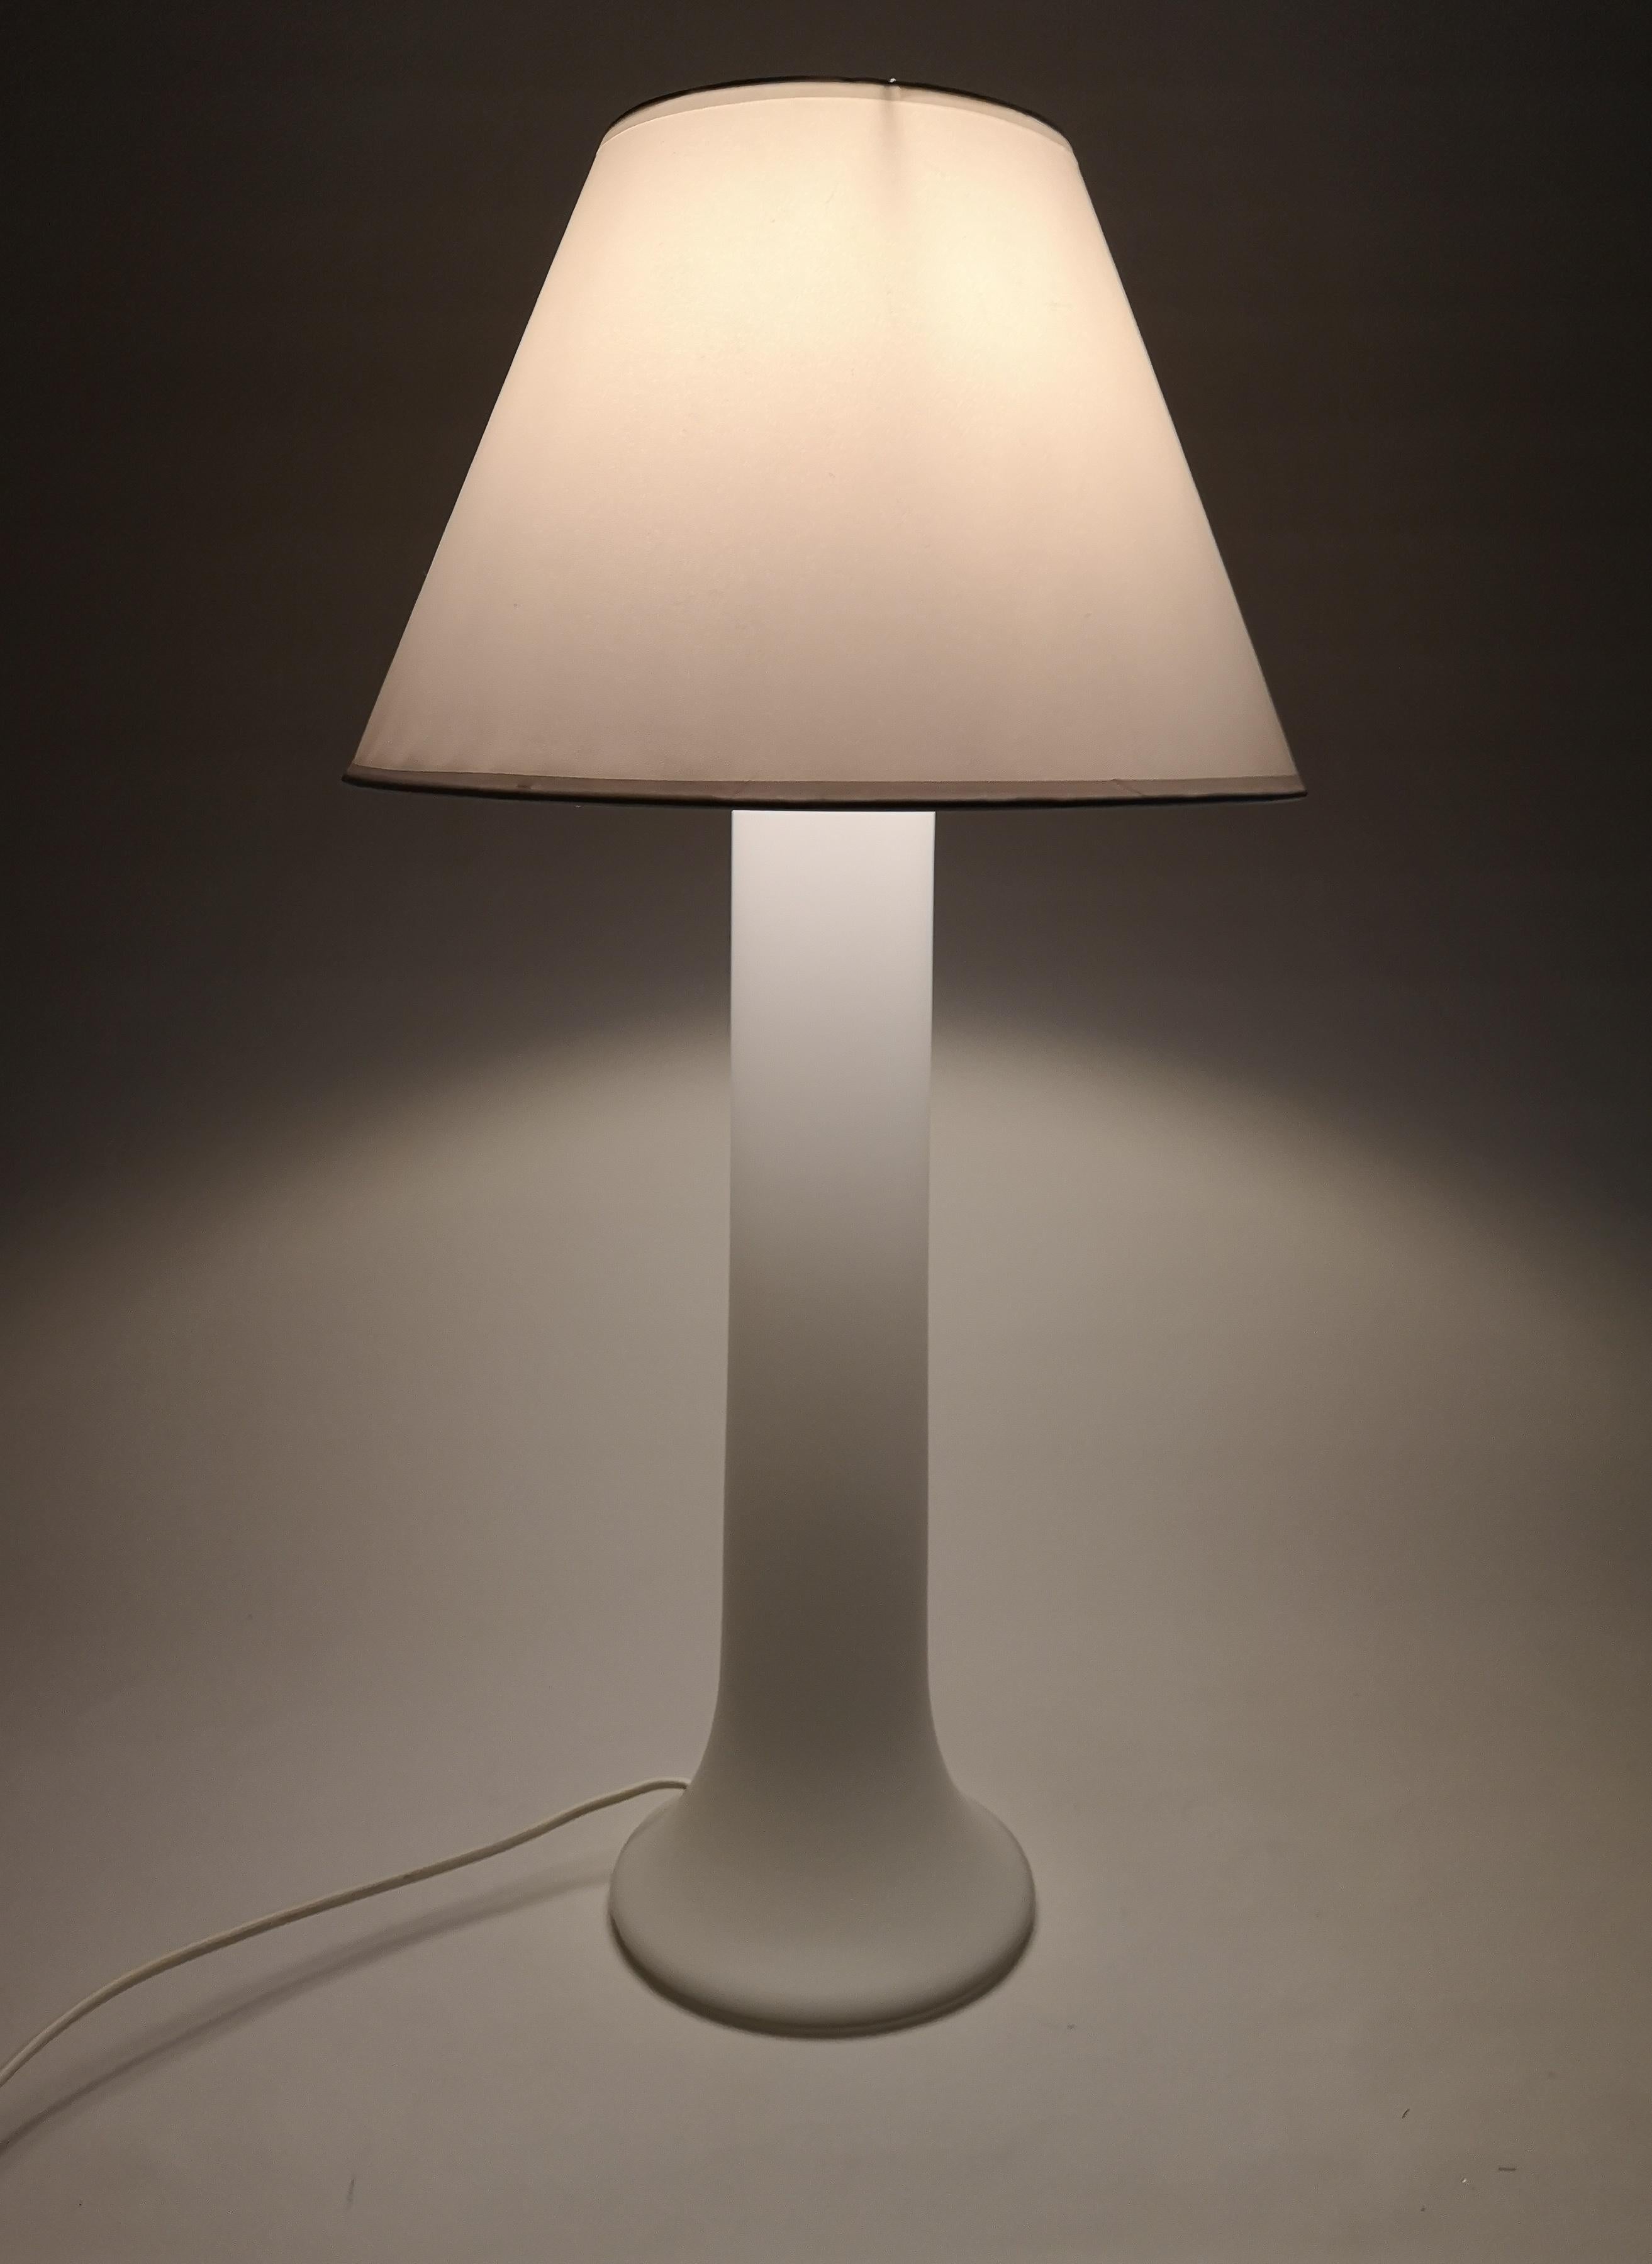 Glass table lamp manufactured by Luxus Sweden in the 1960s.

Very good condition. Shade is not original. 

Measures H 60 cm with shade, D 15 cm.
 